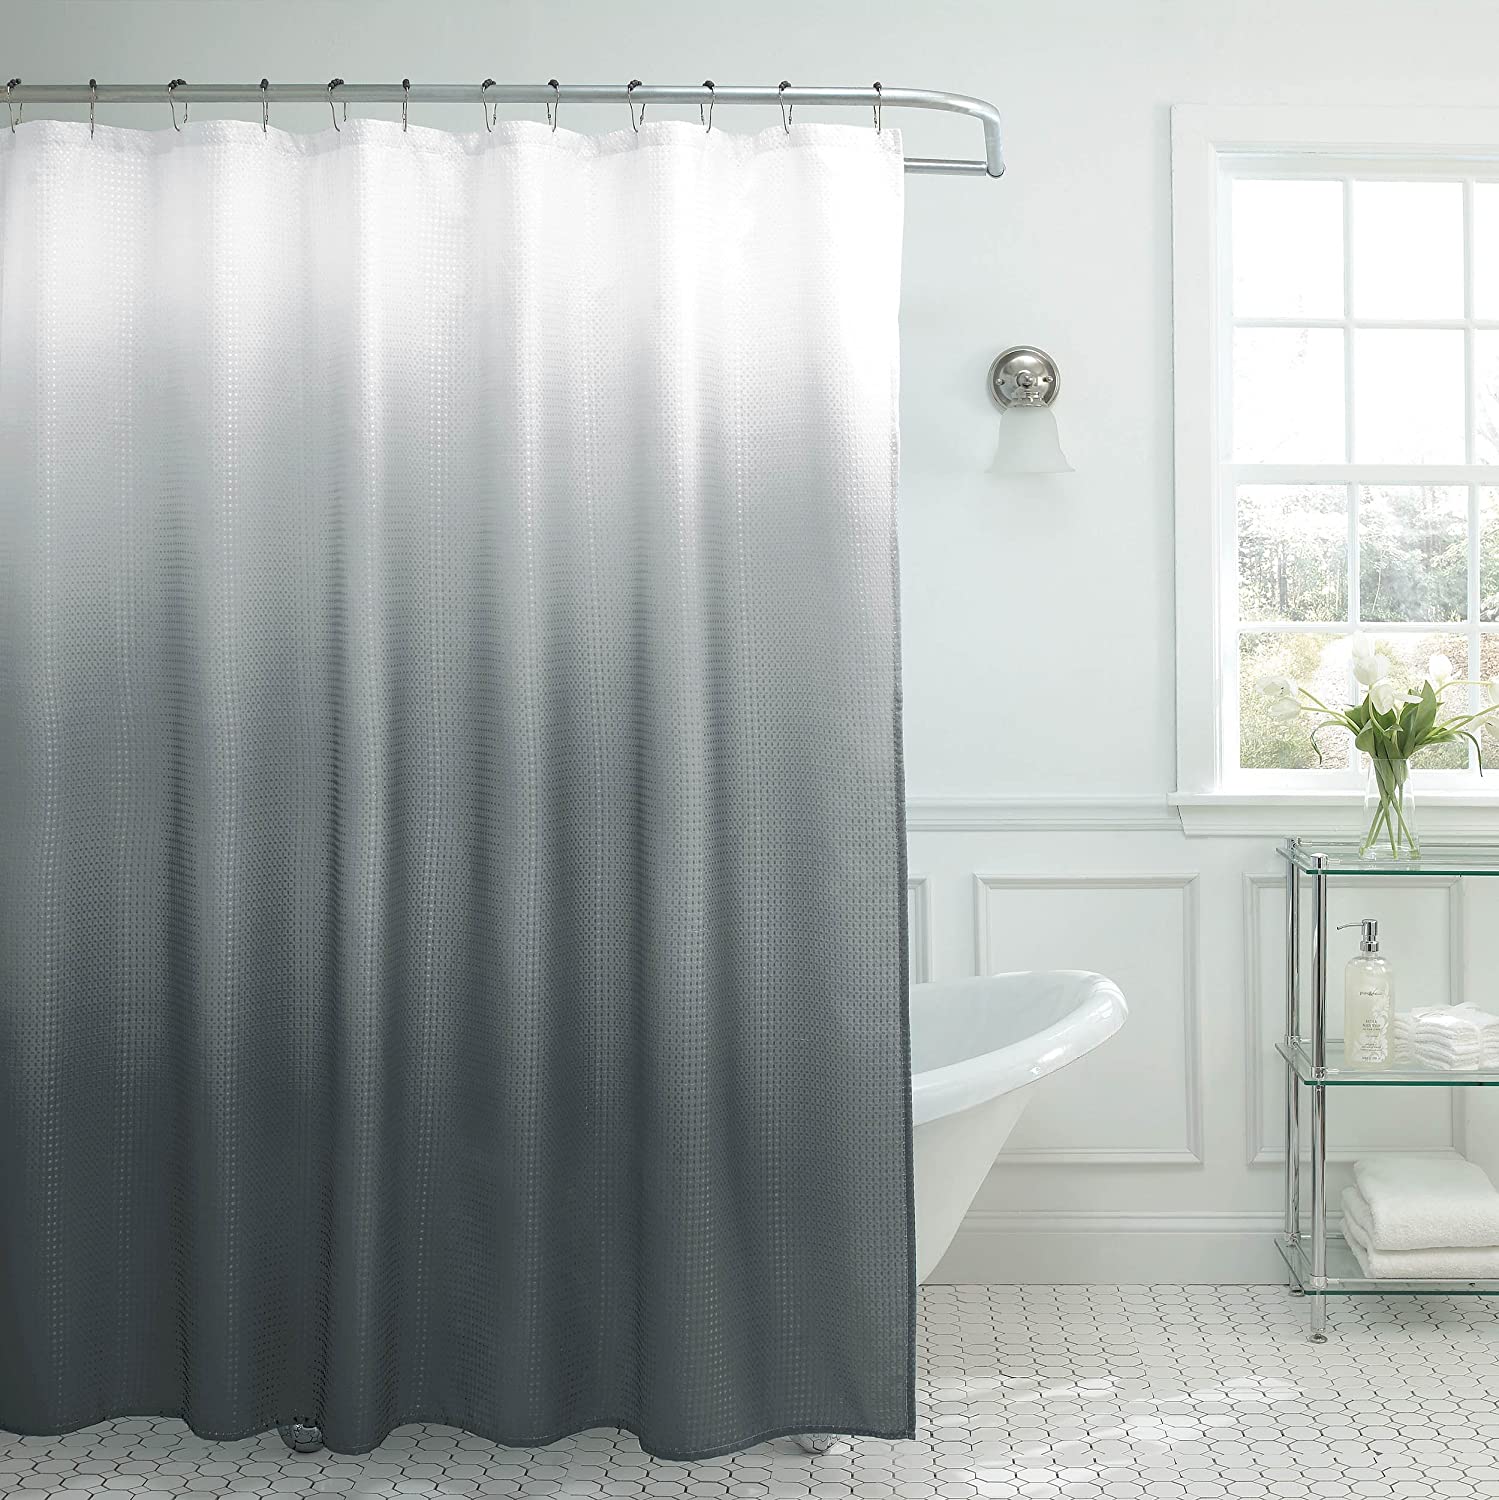 The Best Shower Curtain January 2022, Layered Shower Curtain Ideas